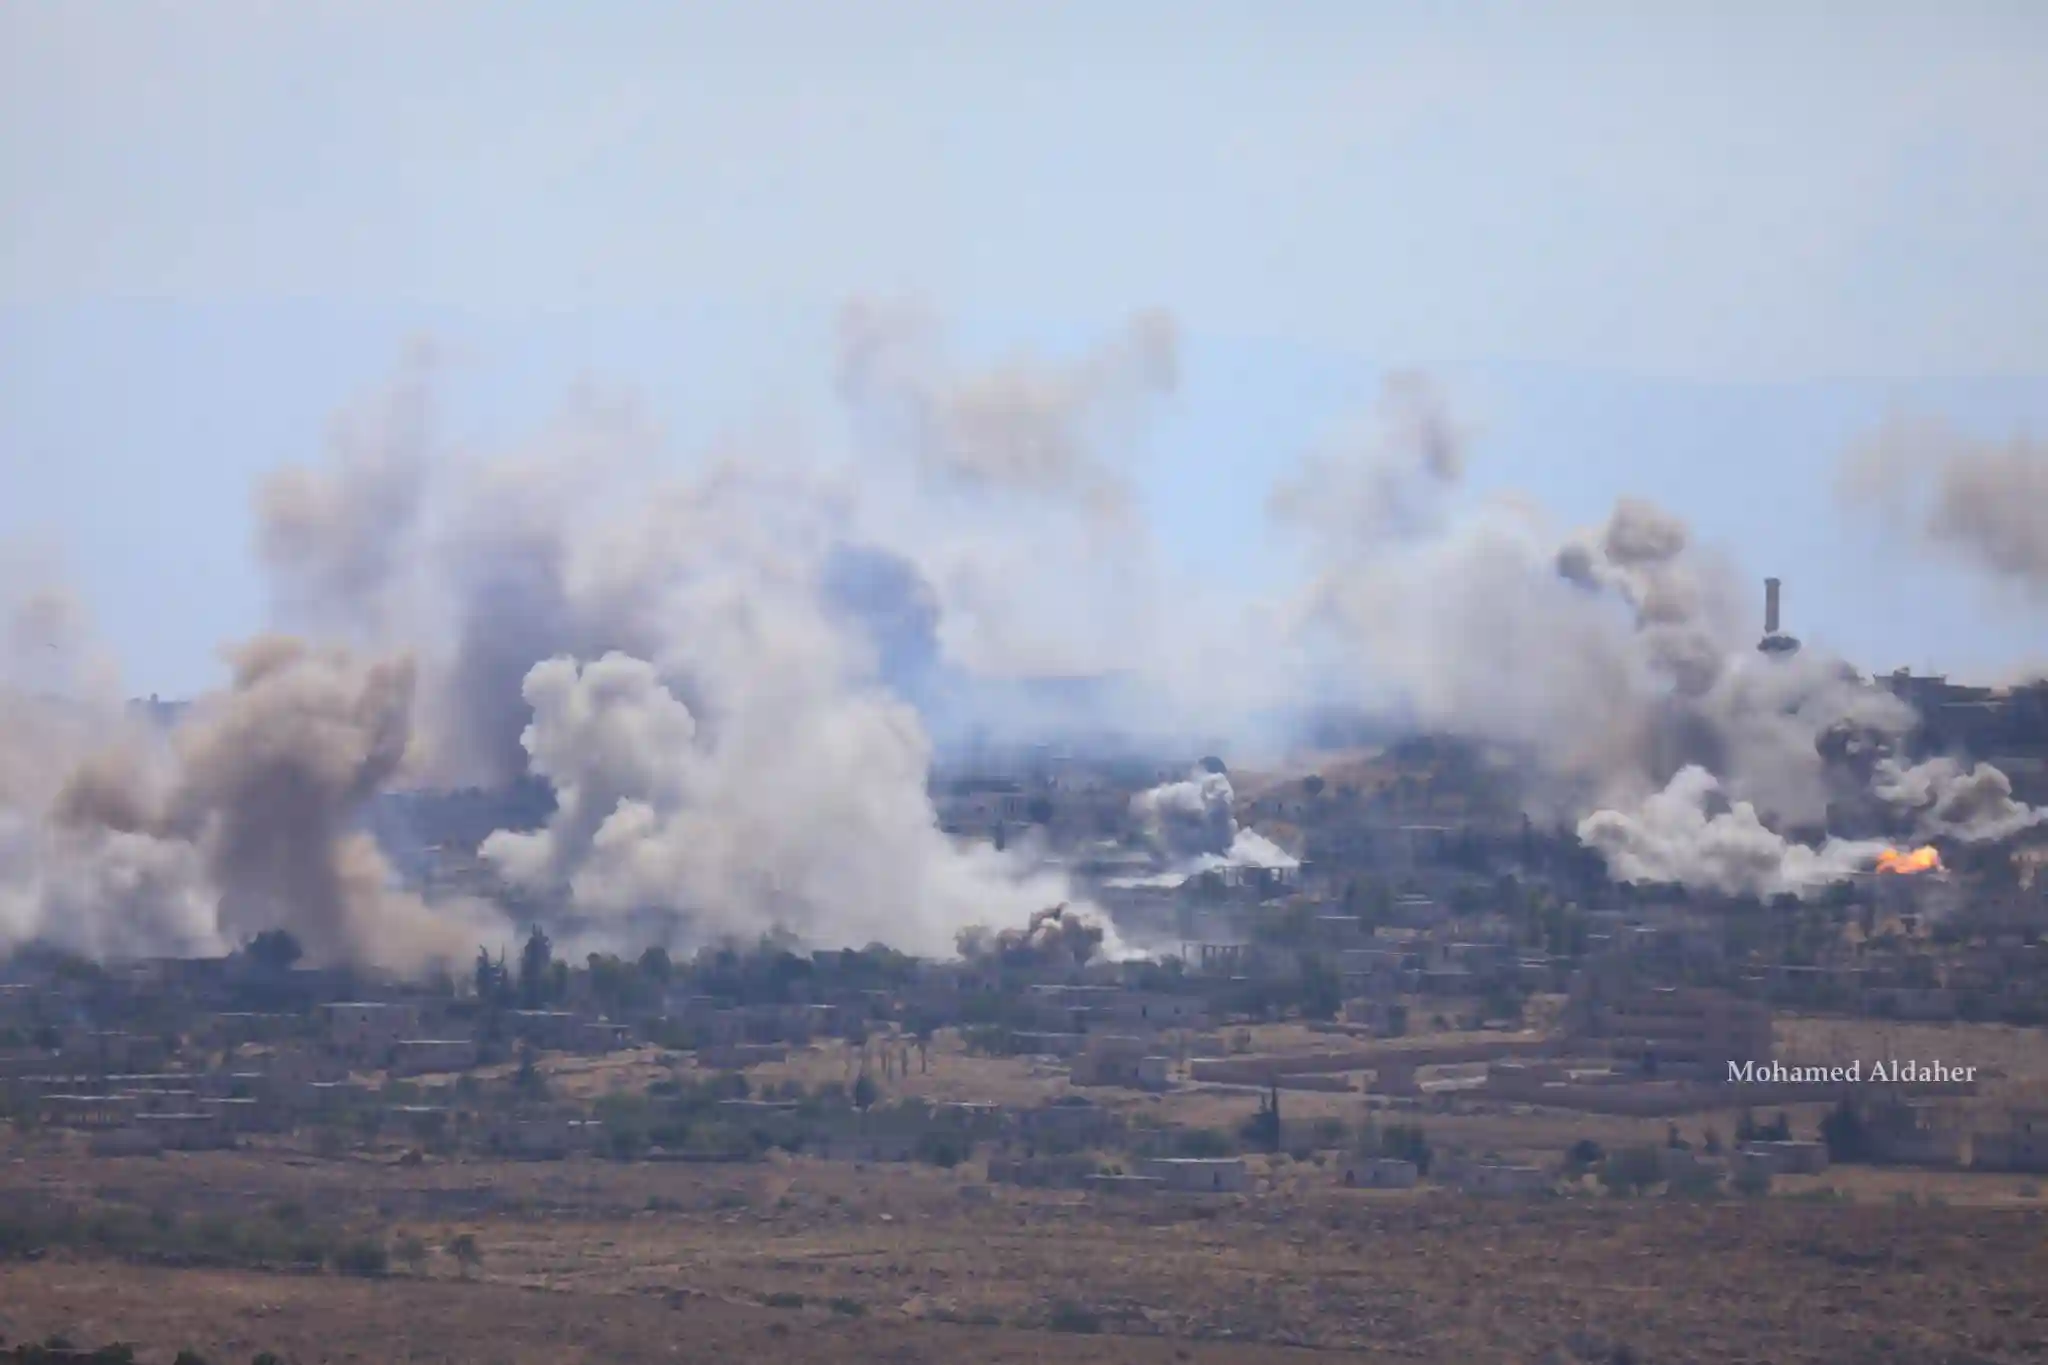 On Tuesday, September 5, 2023, Syrian-Russian alliance forces intensified its ongoing offensive against villages and towns in Jabal al-Zawiya in southern rural Idlib governorate, launching multiple ground and aerial attacks. These led to numerous fires breaking out and destroyed several buildings and vital facilities across the region. The Syrian Network for Human Rights (SNHR) notes that through these attacks, Syrian-Russian alliance forces have again unequivocally violated Security Council resolutions 2139 & 2254, both of which categorically prohibit indiscriminate attacks, as well as violating the rules of international humanitarian law on distinguishing between civilians and fighters. Such attacks aim solely to spread fear and panic among civilians, to drive them from their lands and homes, and to forcibly displace them. It is estimated that 6.5 million people are currently internally displaced in Syria. The international community must put pressure on the Syrian regime and its allies to support a process of political transition. Pressure should be applied on all parties to compel them to launch such a transition within a period of no more than six months, so that millions of displaced people can safely and stably return to their homes.